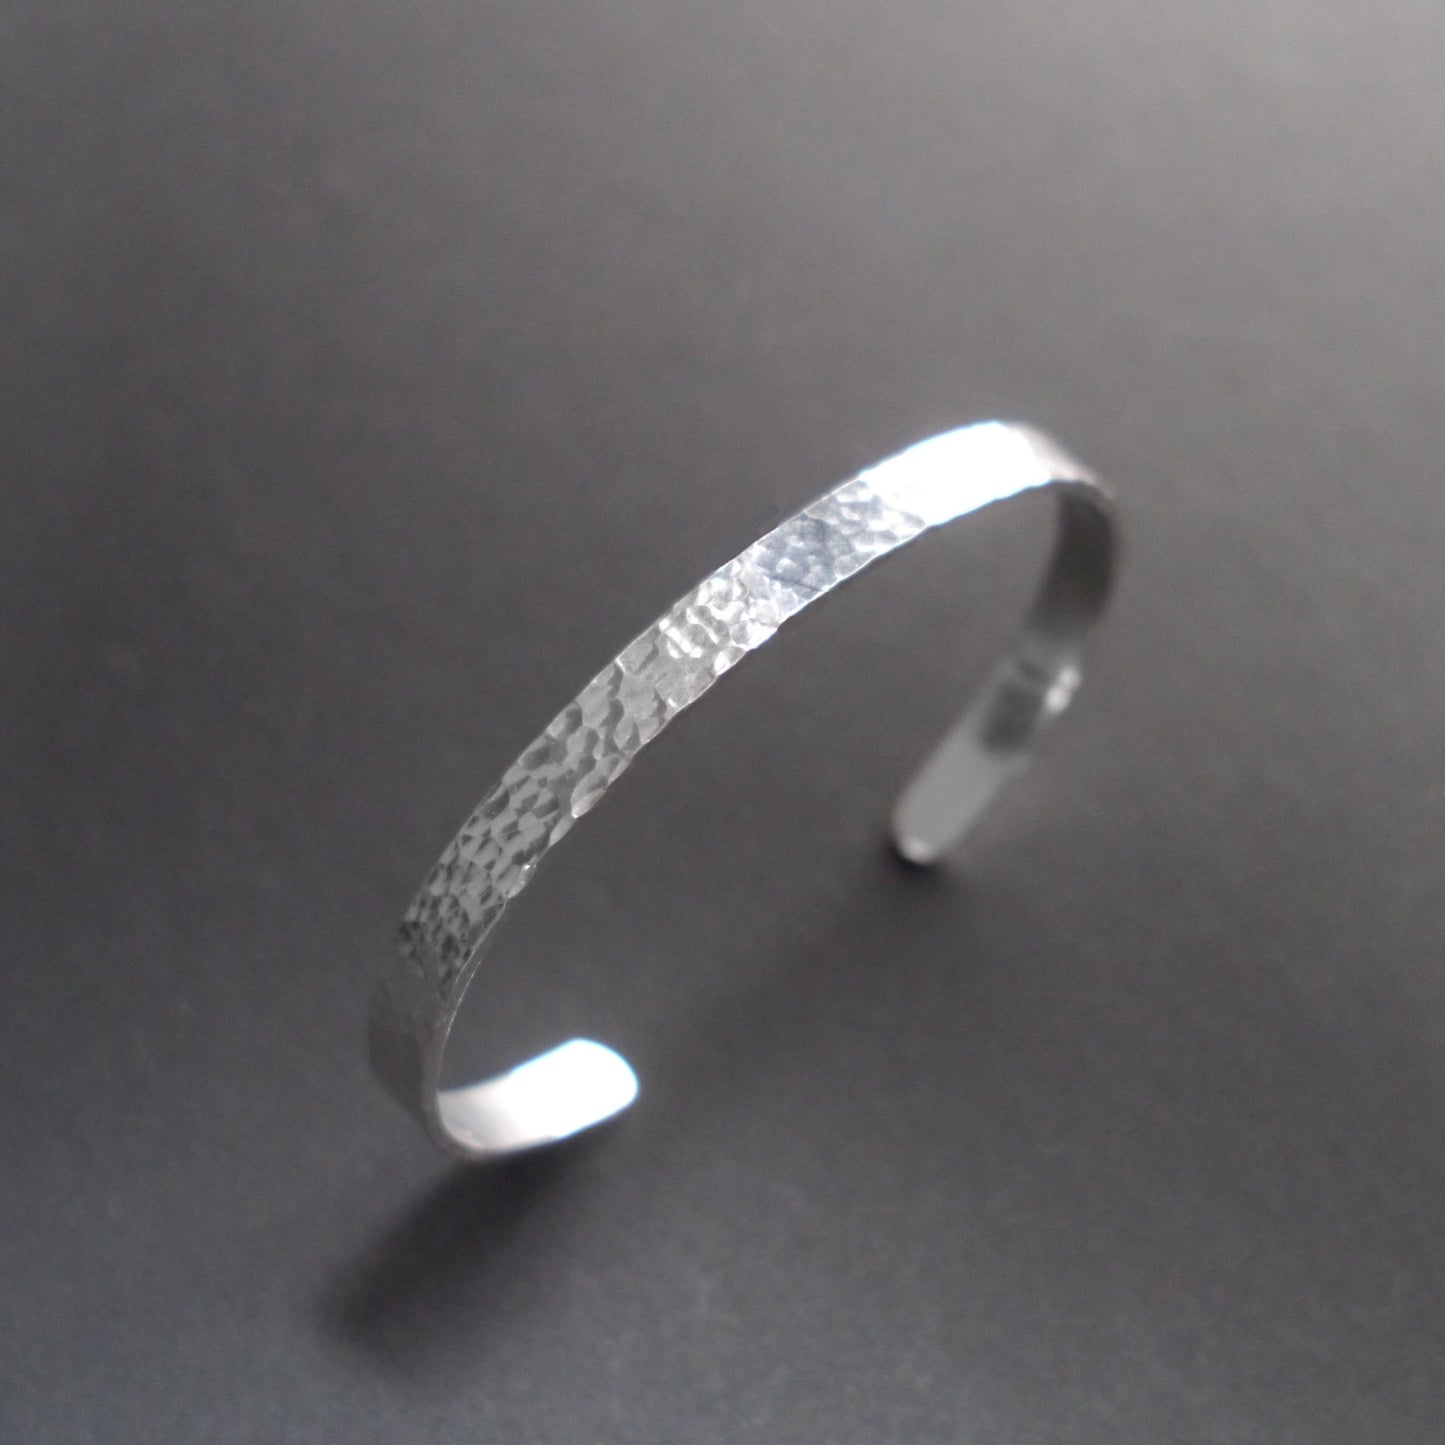 Hammered Texture Cuff in 6mm Sterling Silver